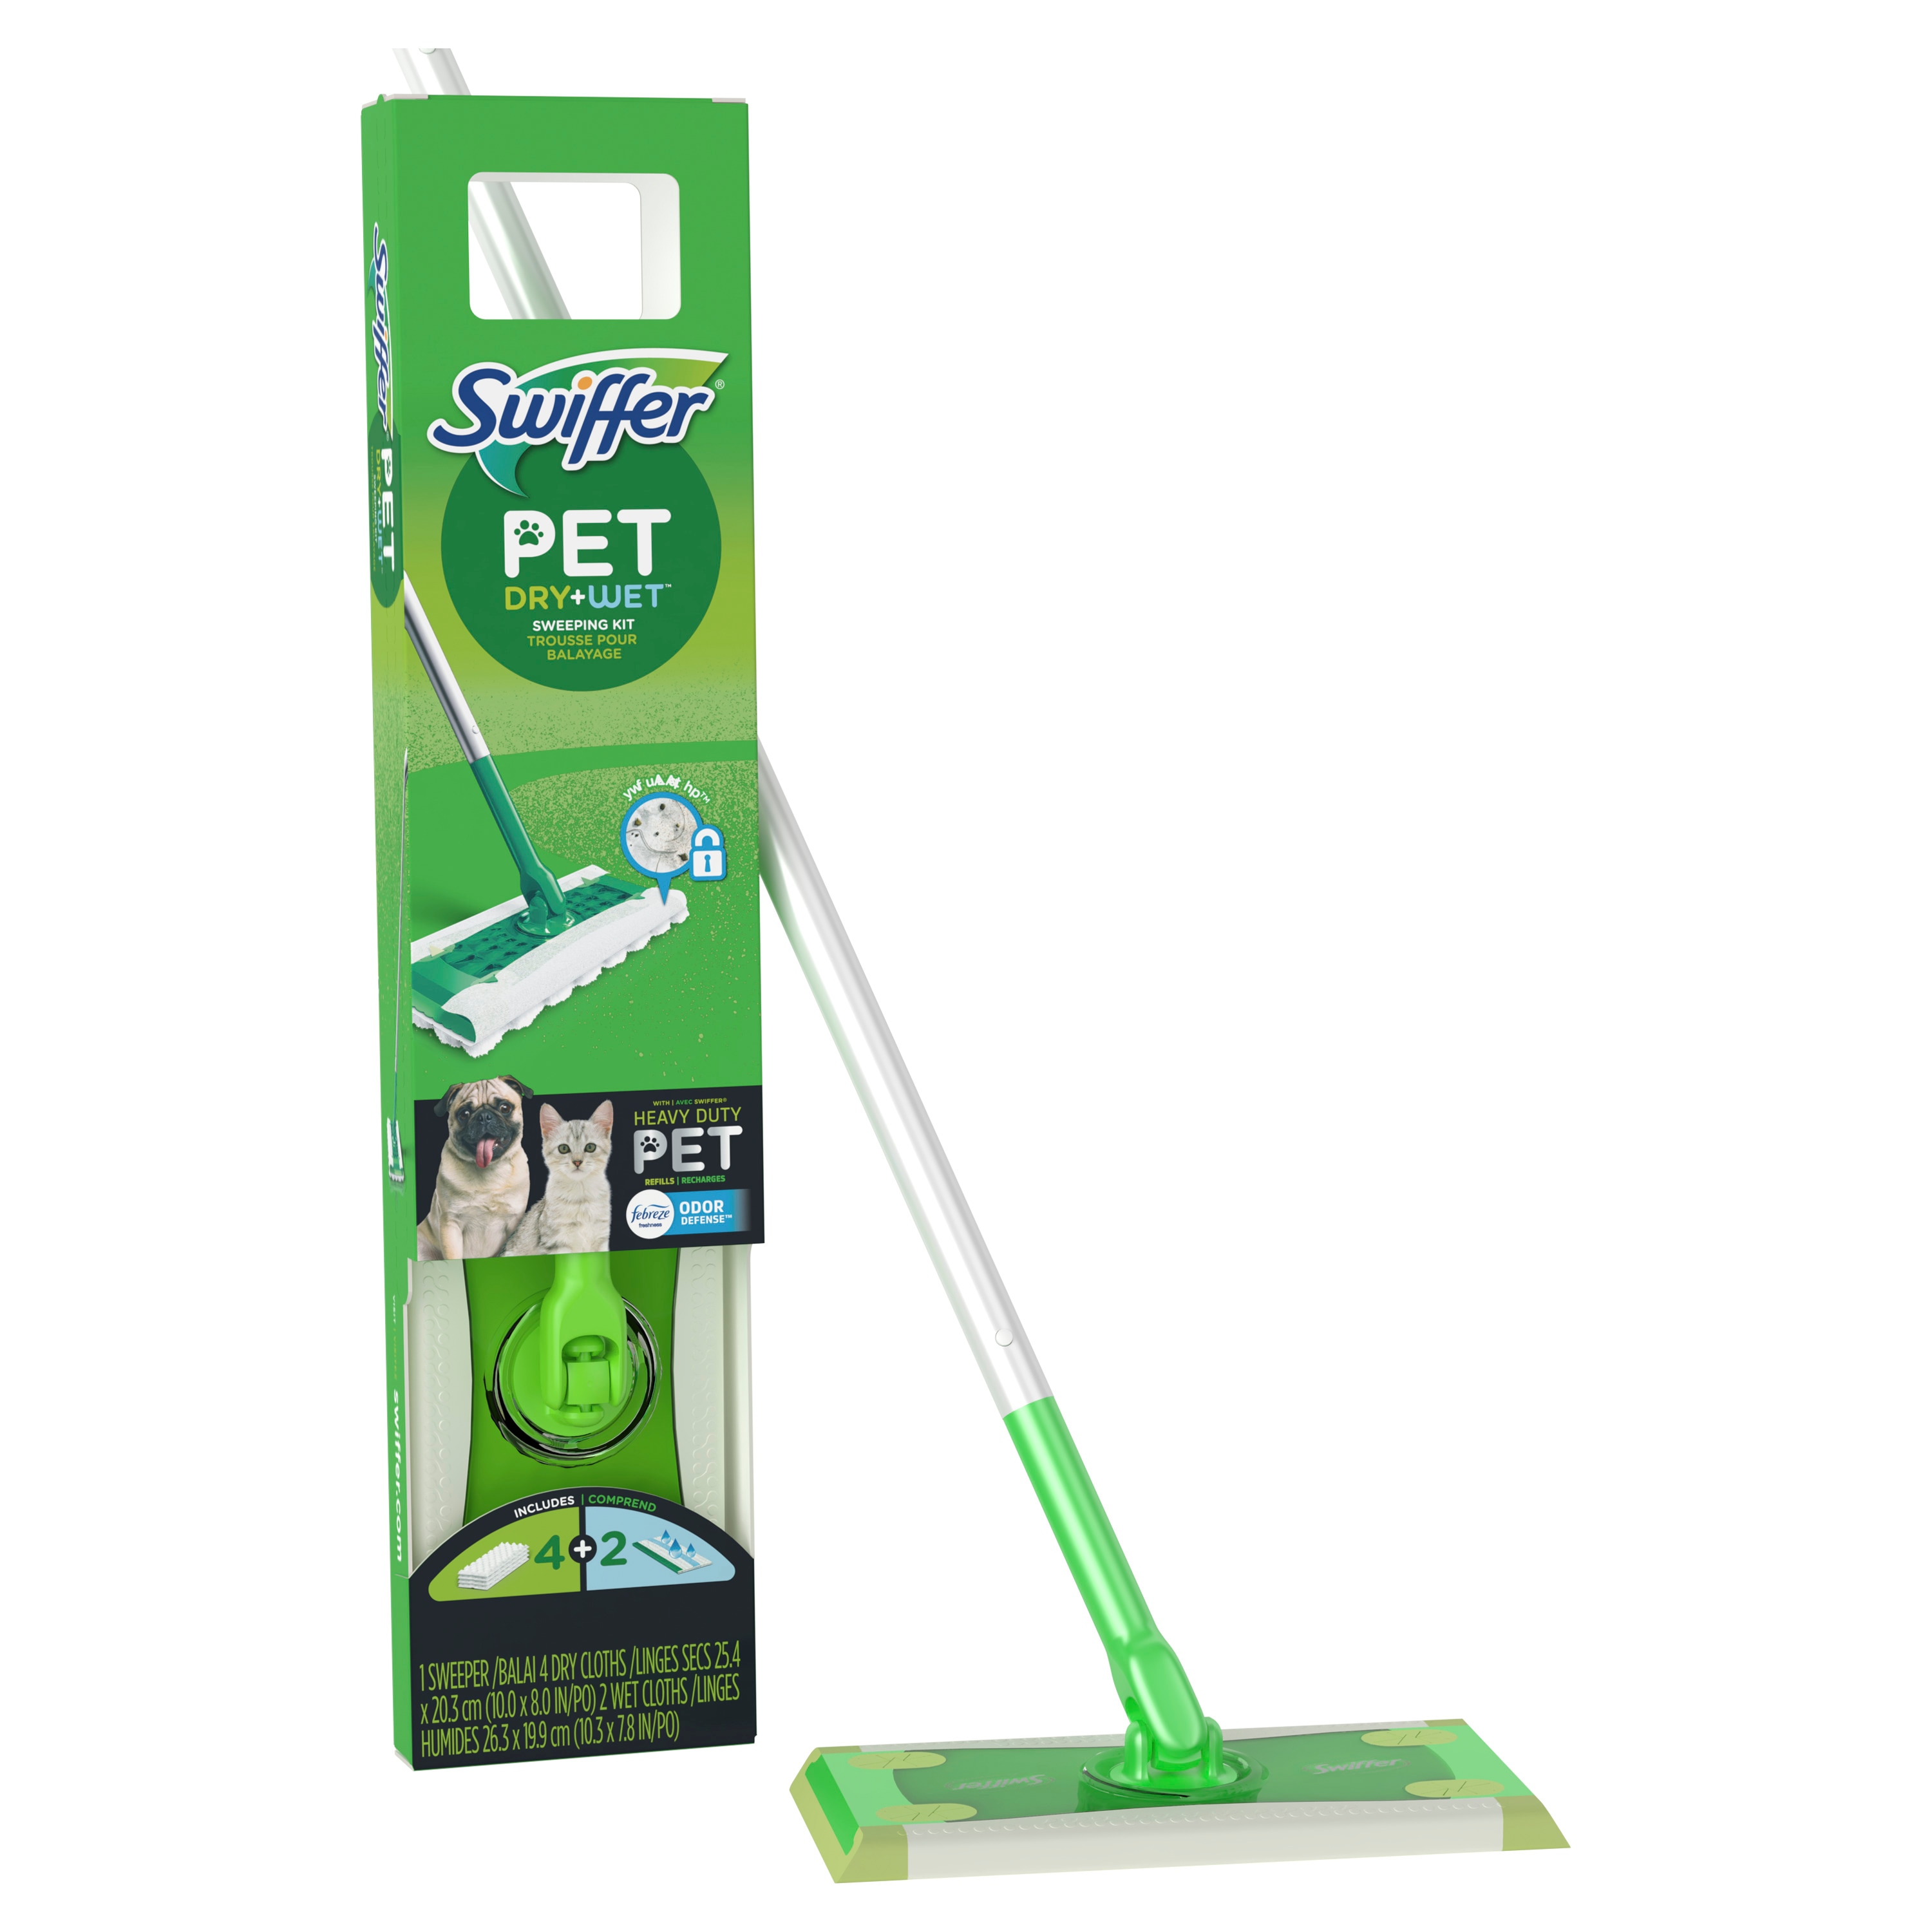 Swiffer Sweeper Heavy Duty Wet Mopping Cloths Pet 20ct : Cleaning